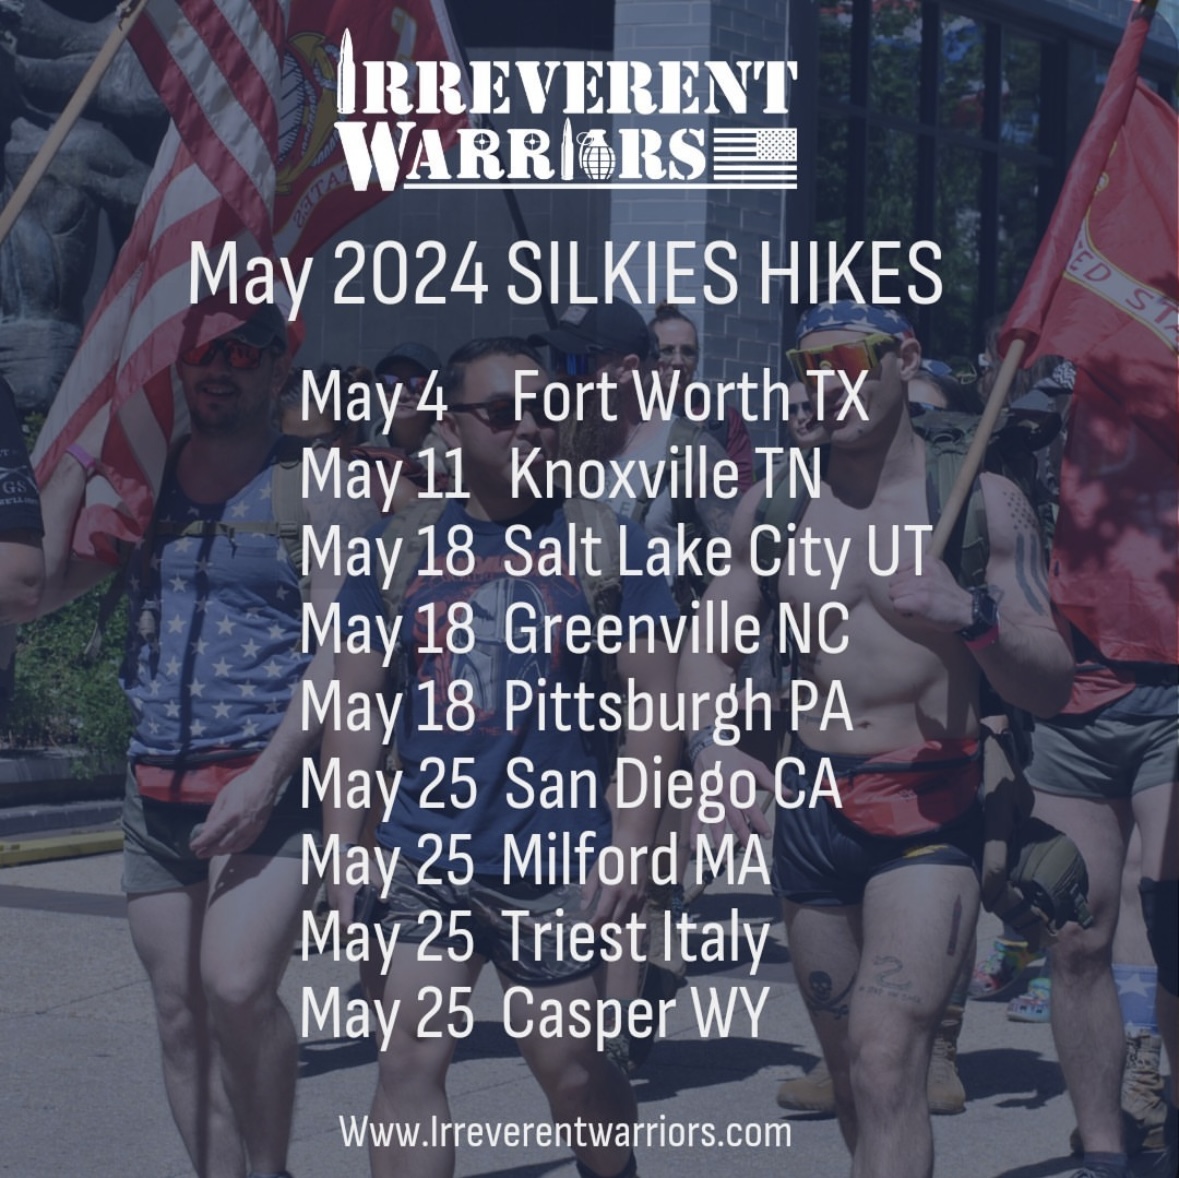 It's gonna be MAY. 😎 New month, new silkies hikes! May is stacked and we are looking forward to visiting NINE different cities. If you haven't registered for one of these hikes and you want to attend, make sure to visit our website to do so. > irreverentwarriors.com/events/